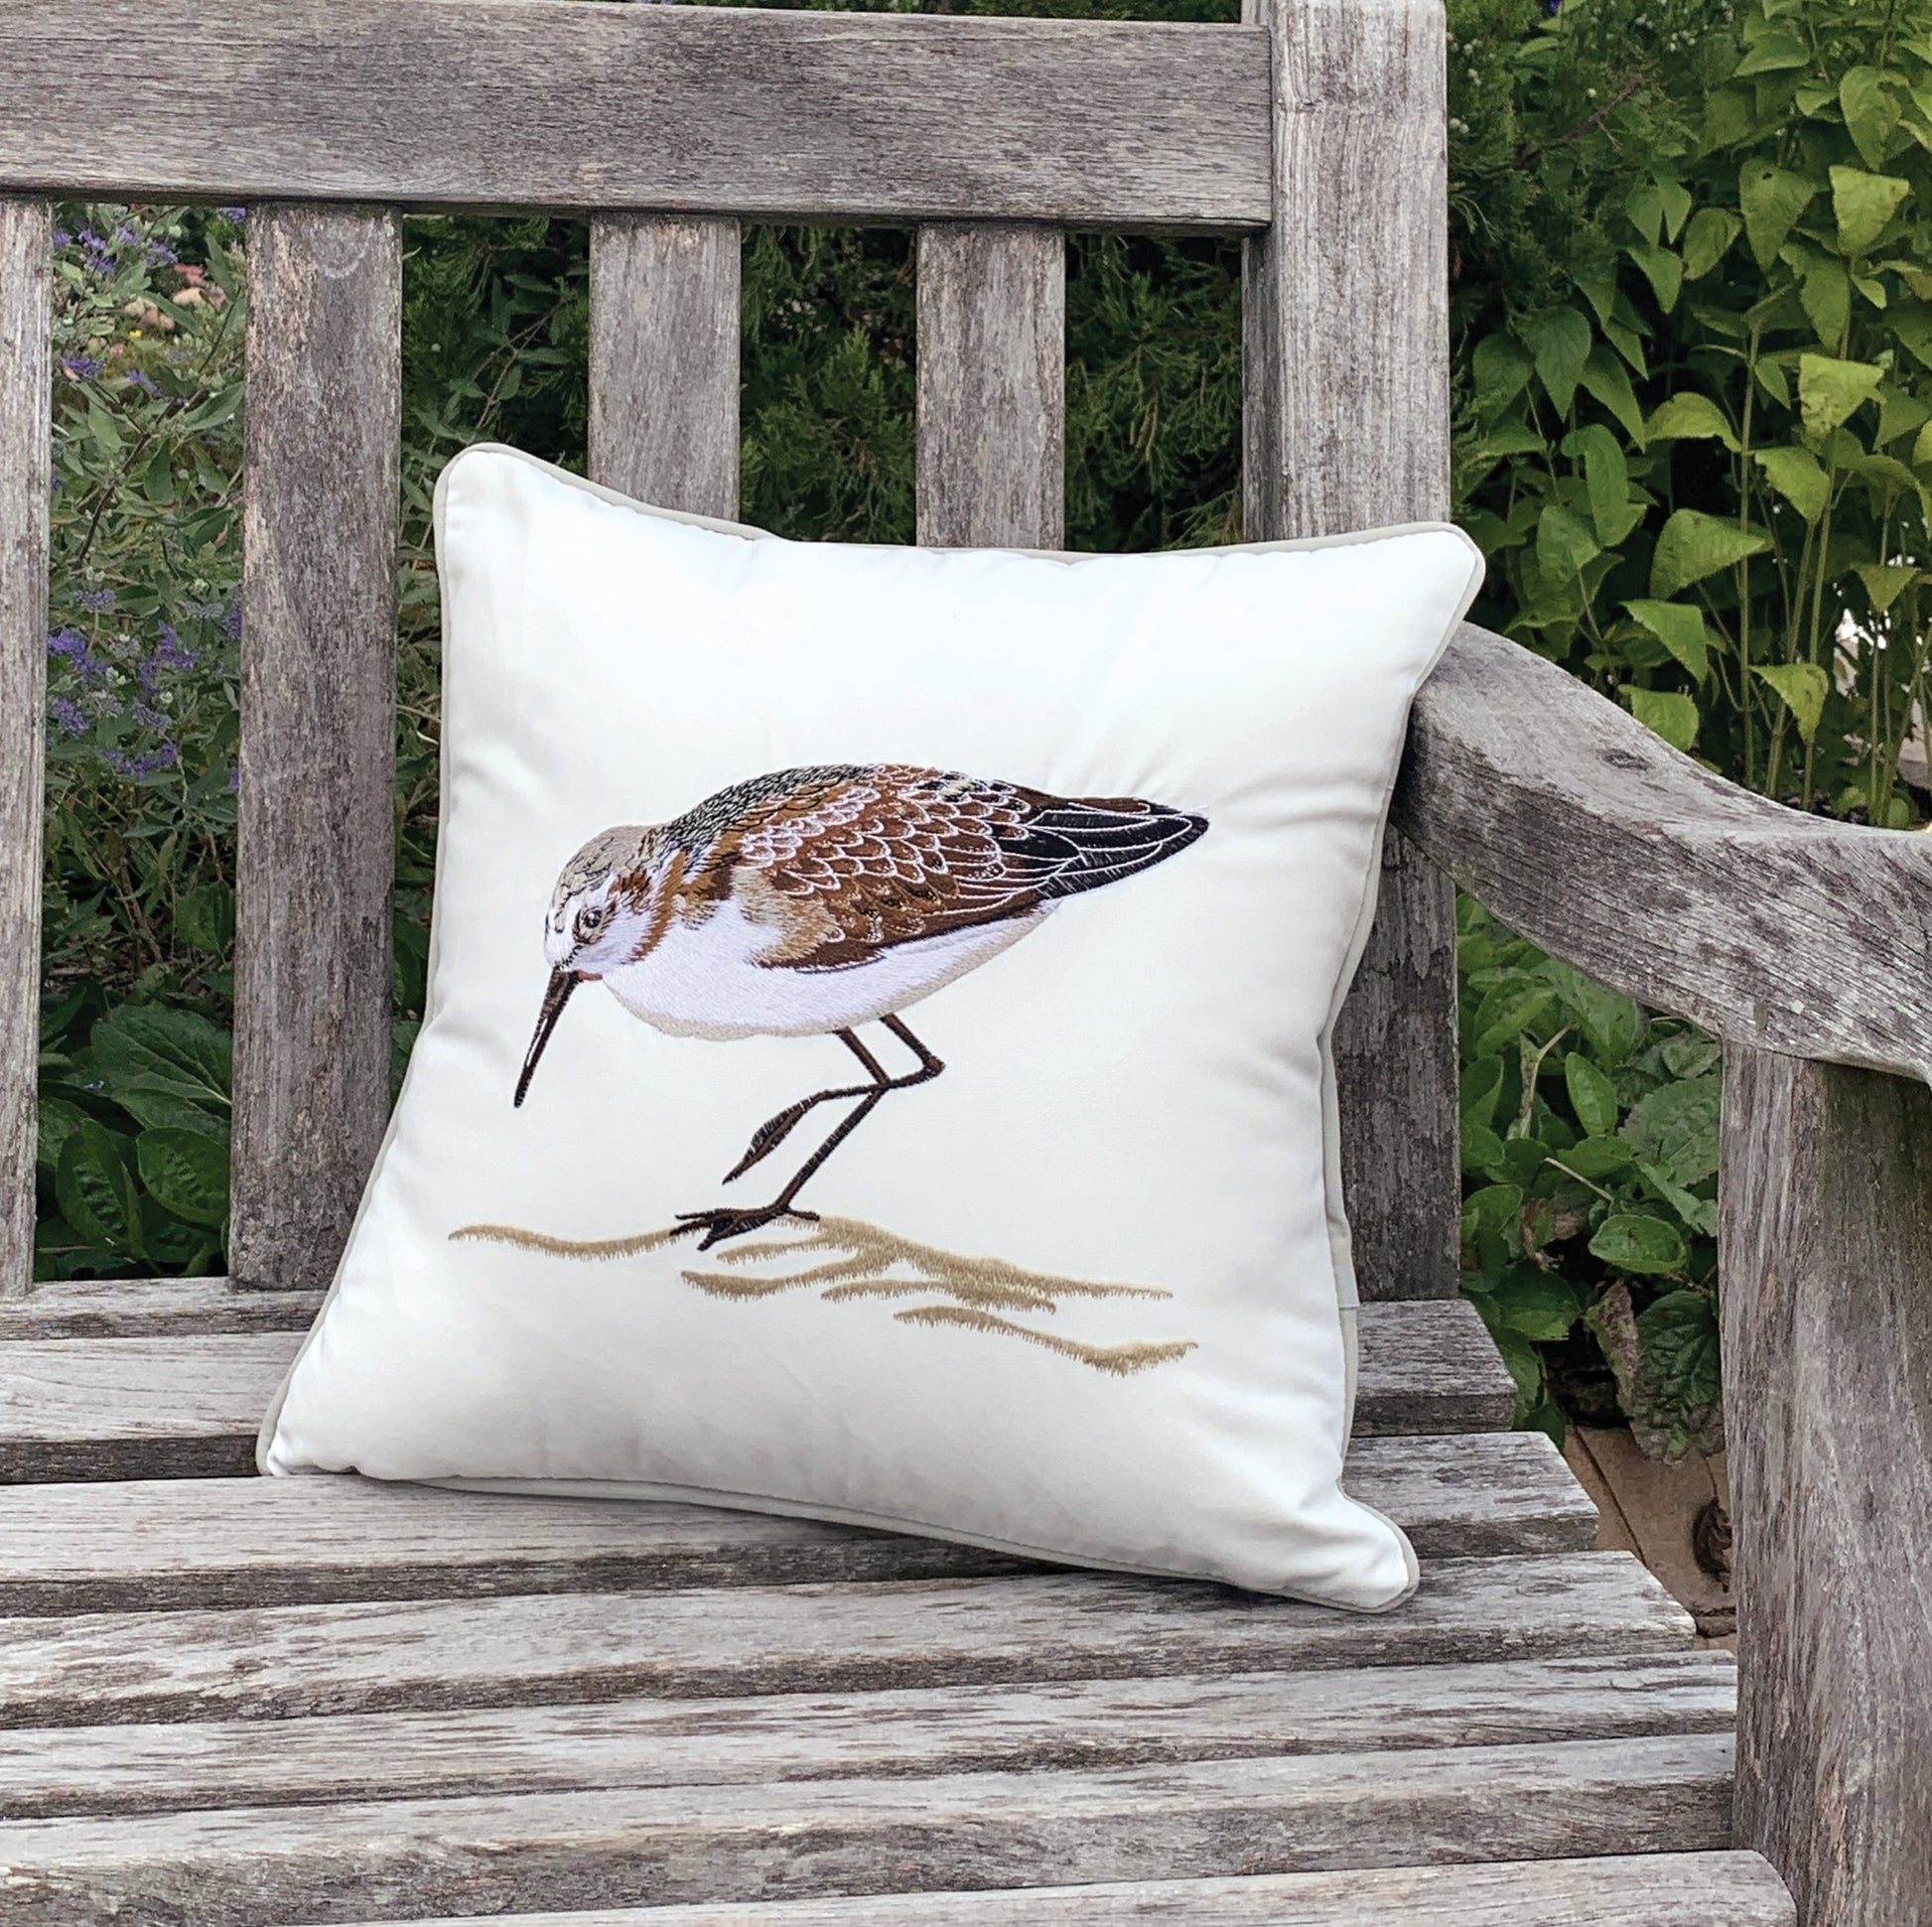 Sandpiper Chillin Left pillow styled on a garden bench.